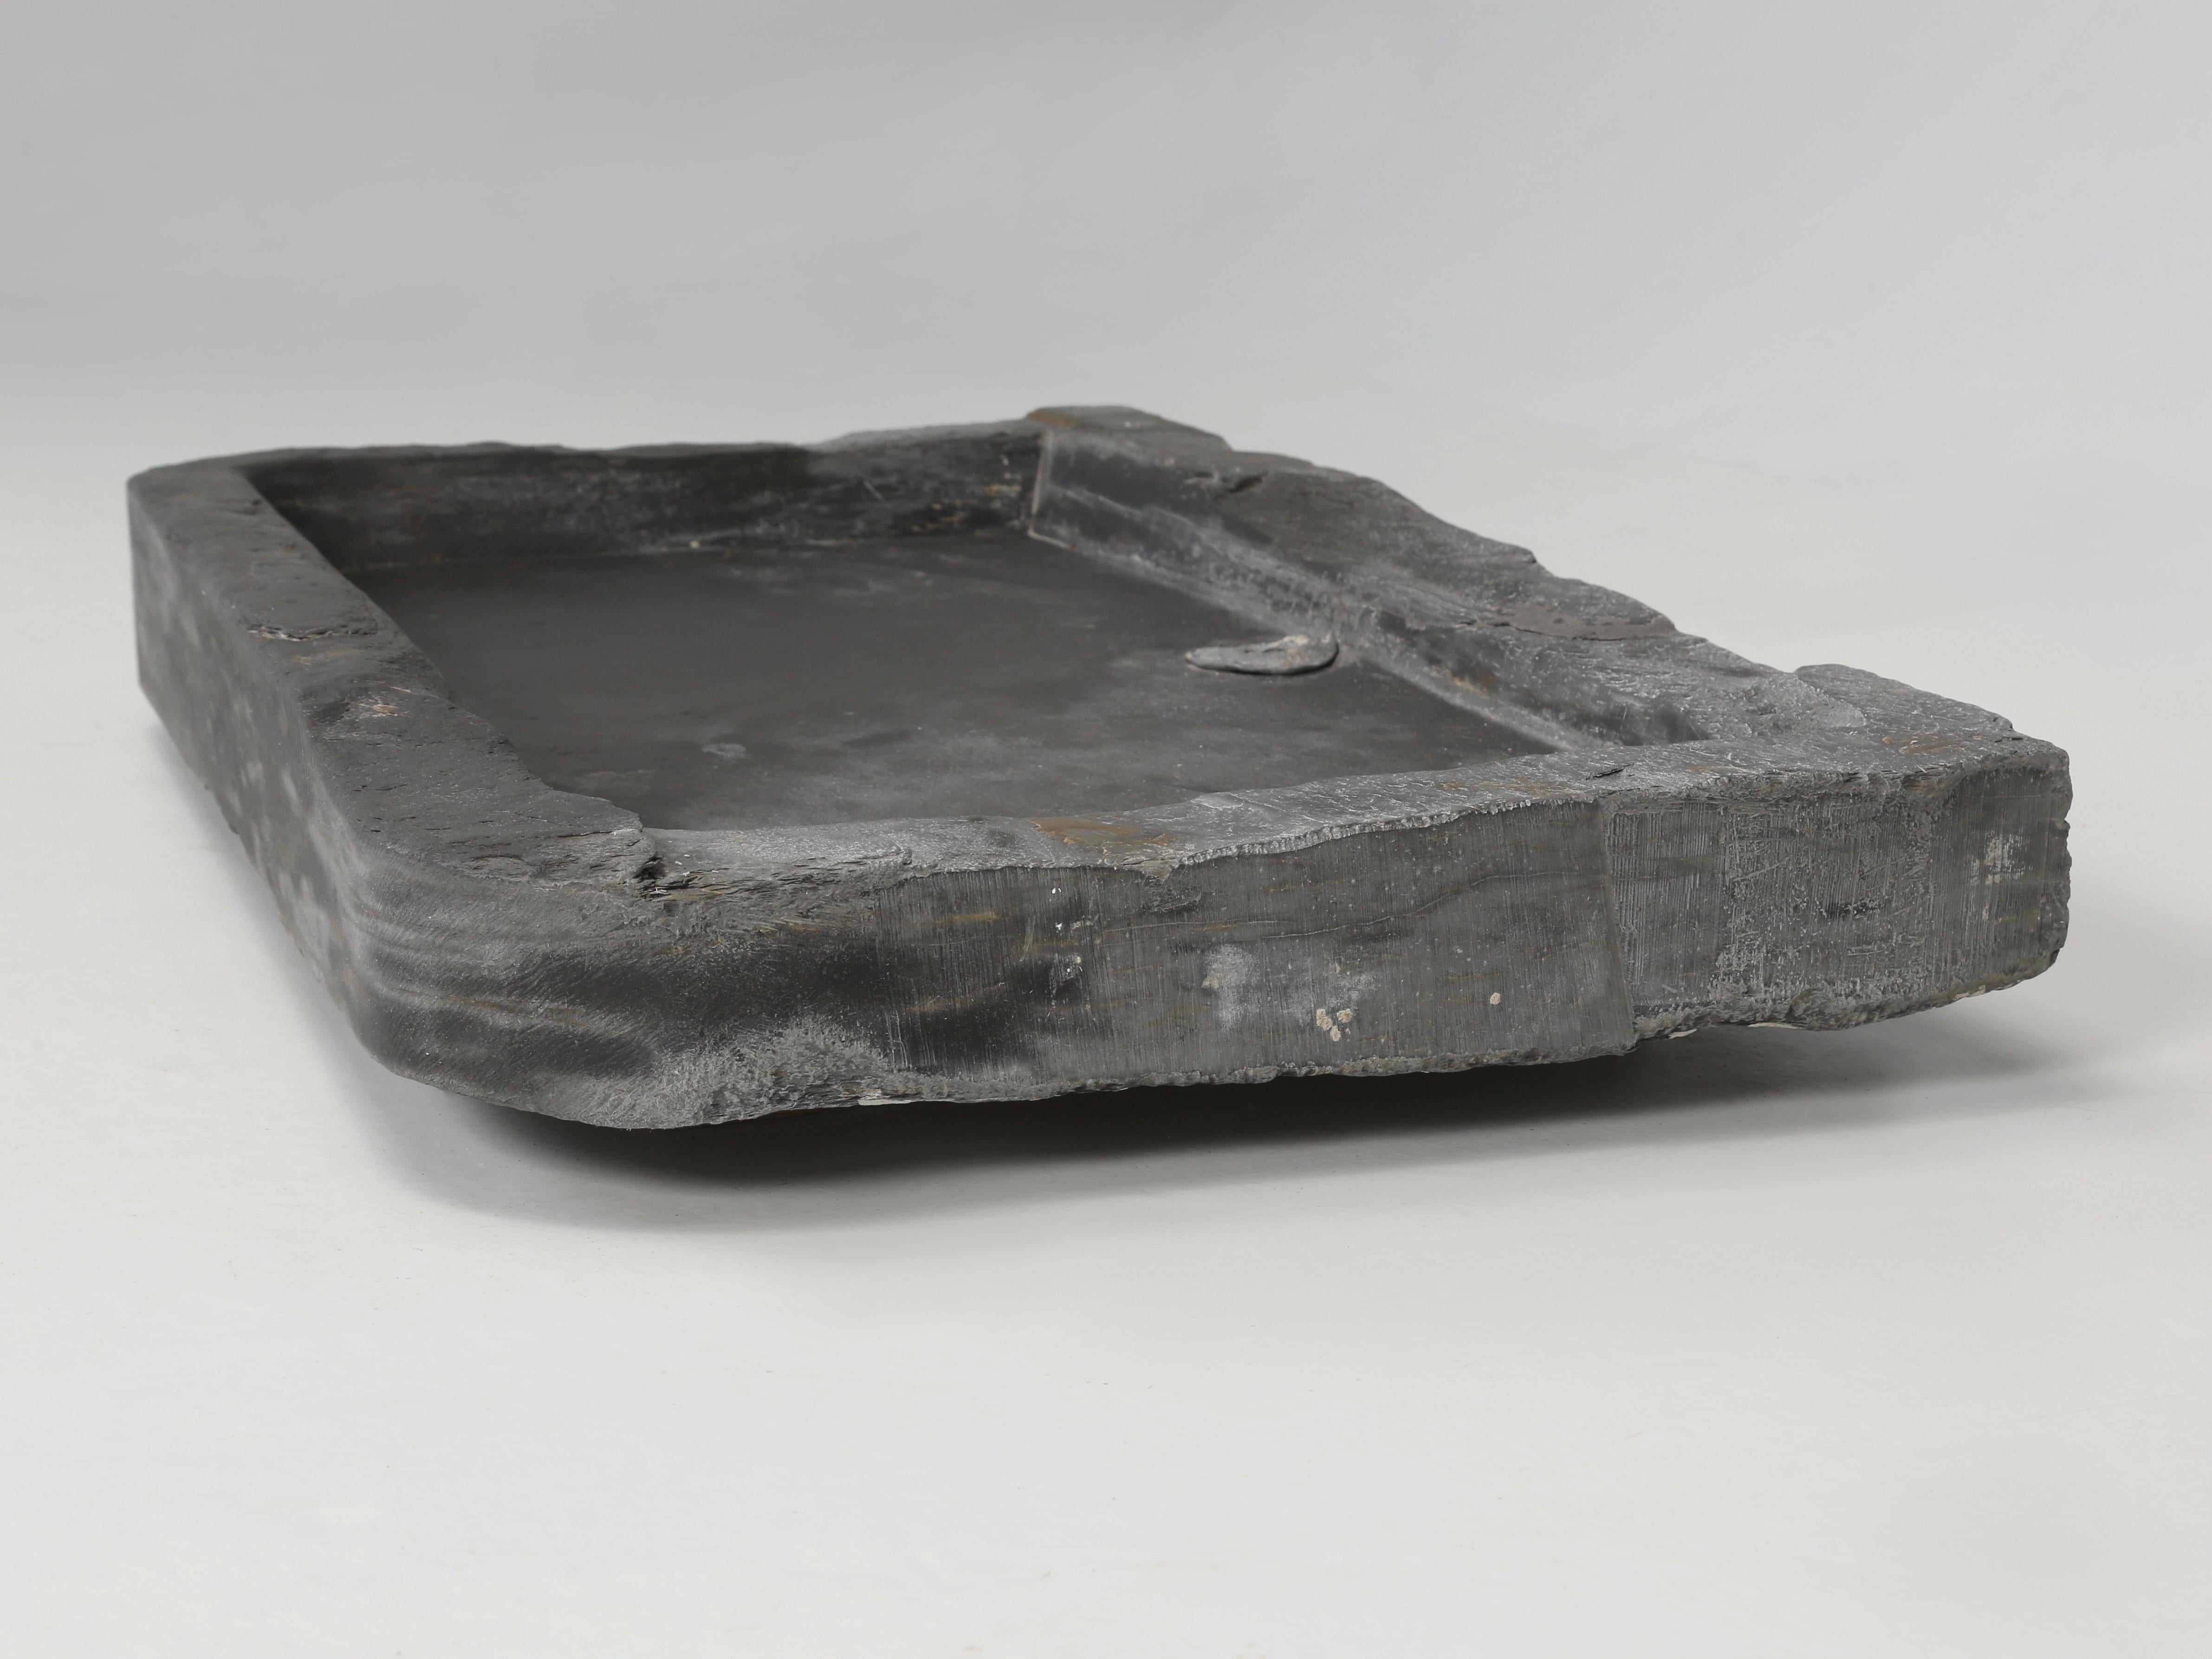 Antique stone sink made from Belgium bluestone is our best guess and probably from the mid-1800's. There is an old drain that is not in the best of condition and clearly requires replacement. We don't see any prior repairs to the sink itself and we